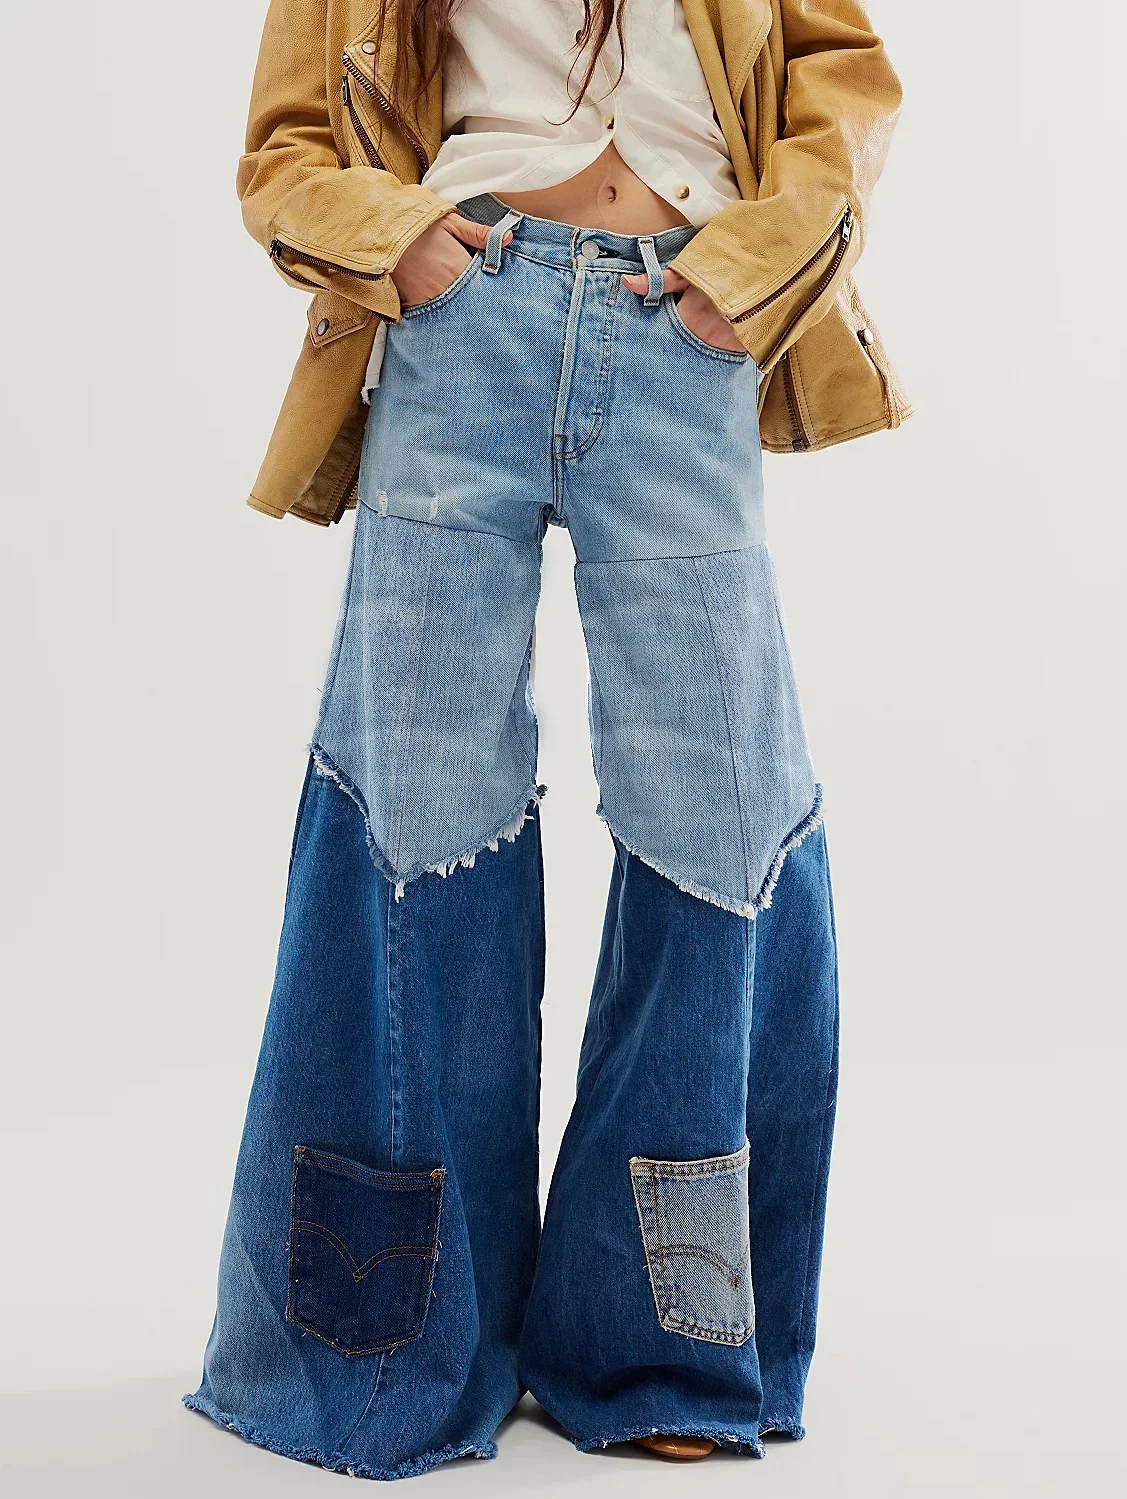 

Patchwork High Waist For Female Denim Pants Slimming Hit Color Wide-legged Colorblock Pocket Flares Trousers Fashion Streetwear